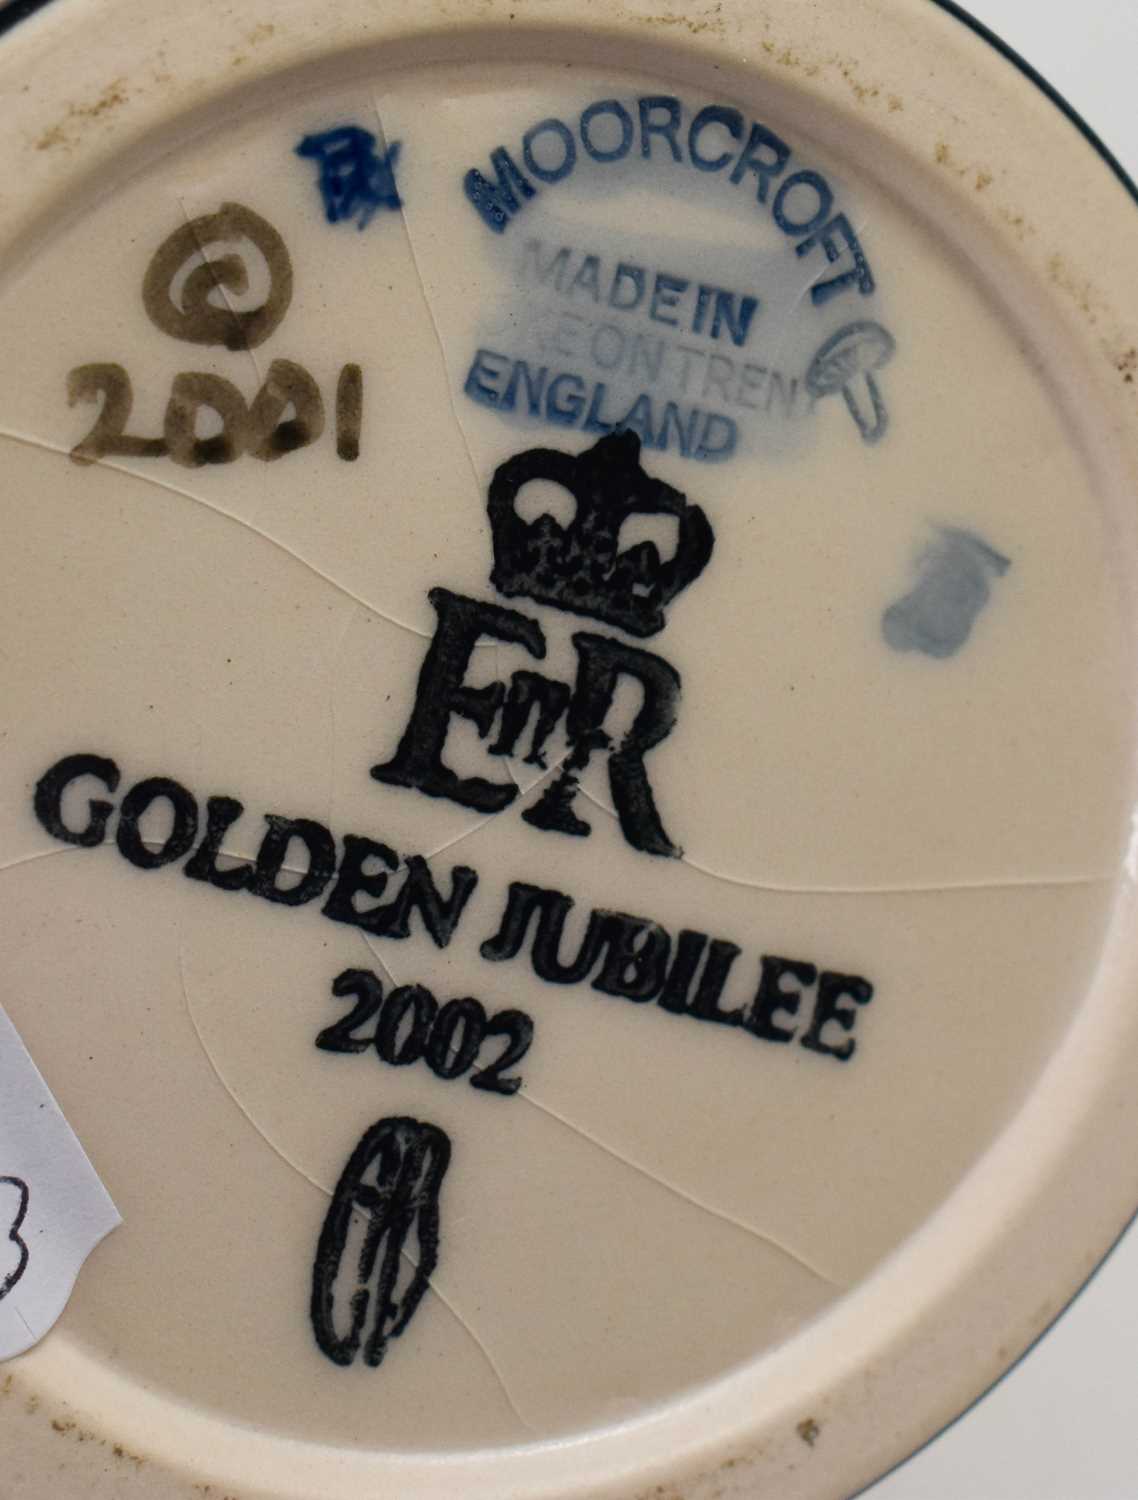 A Moorcroft vase commemorating the Golden Jubilee 2002, bearing impressed mark and dated 2001 to the - Image 2 of 2